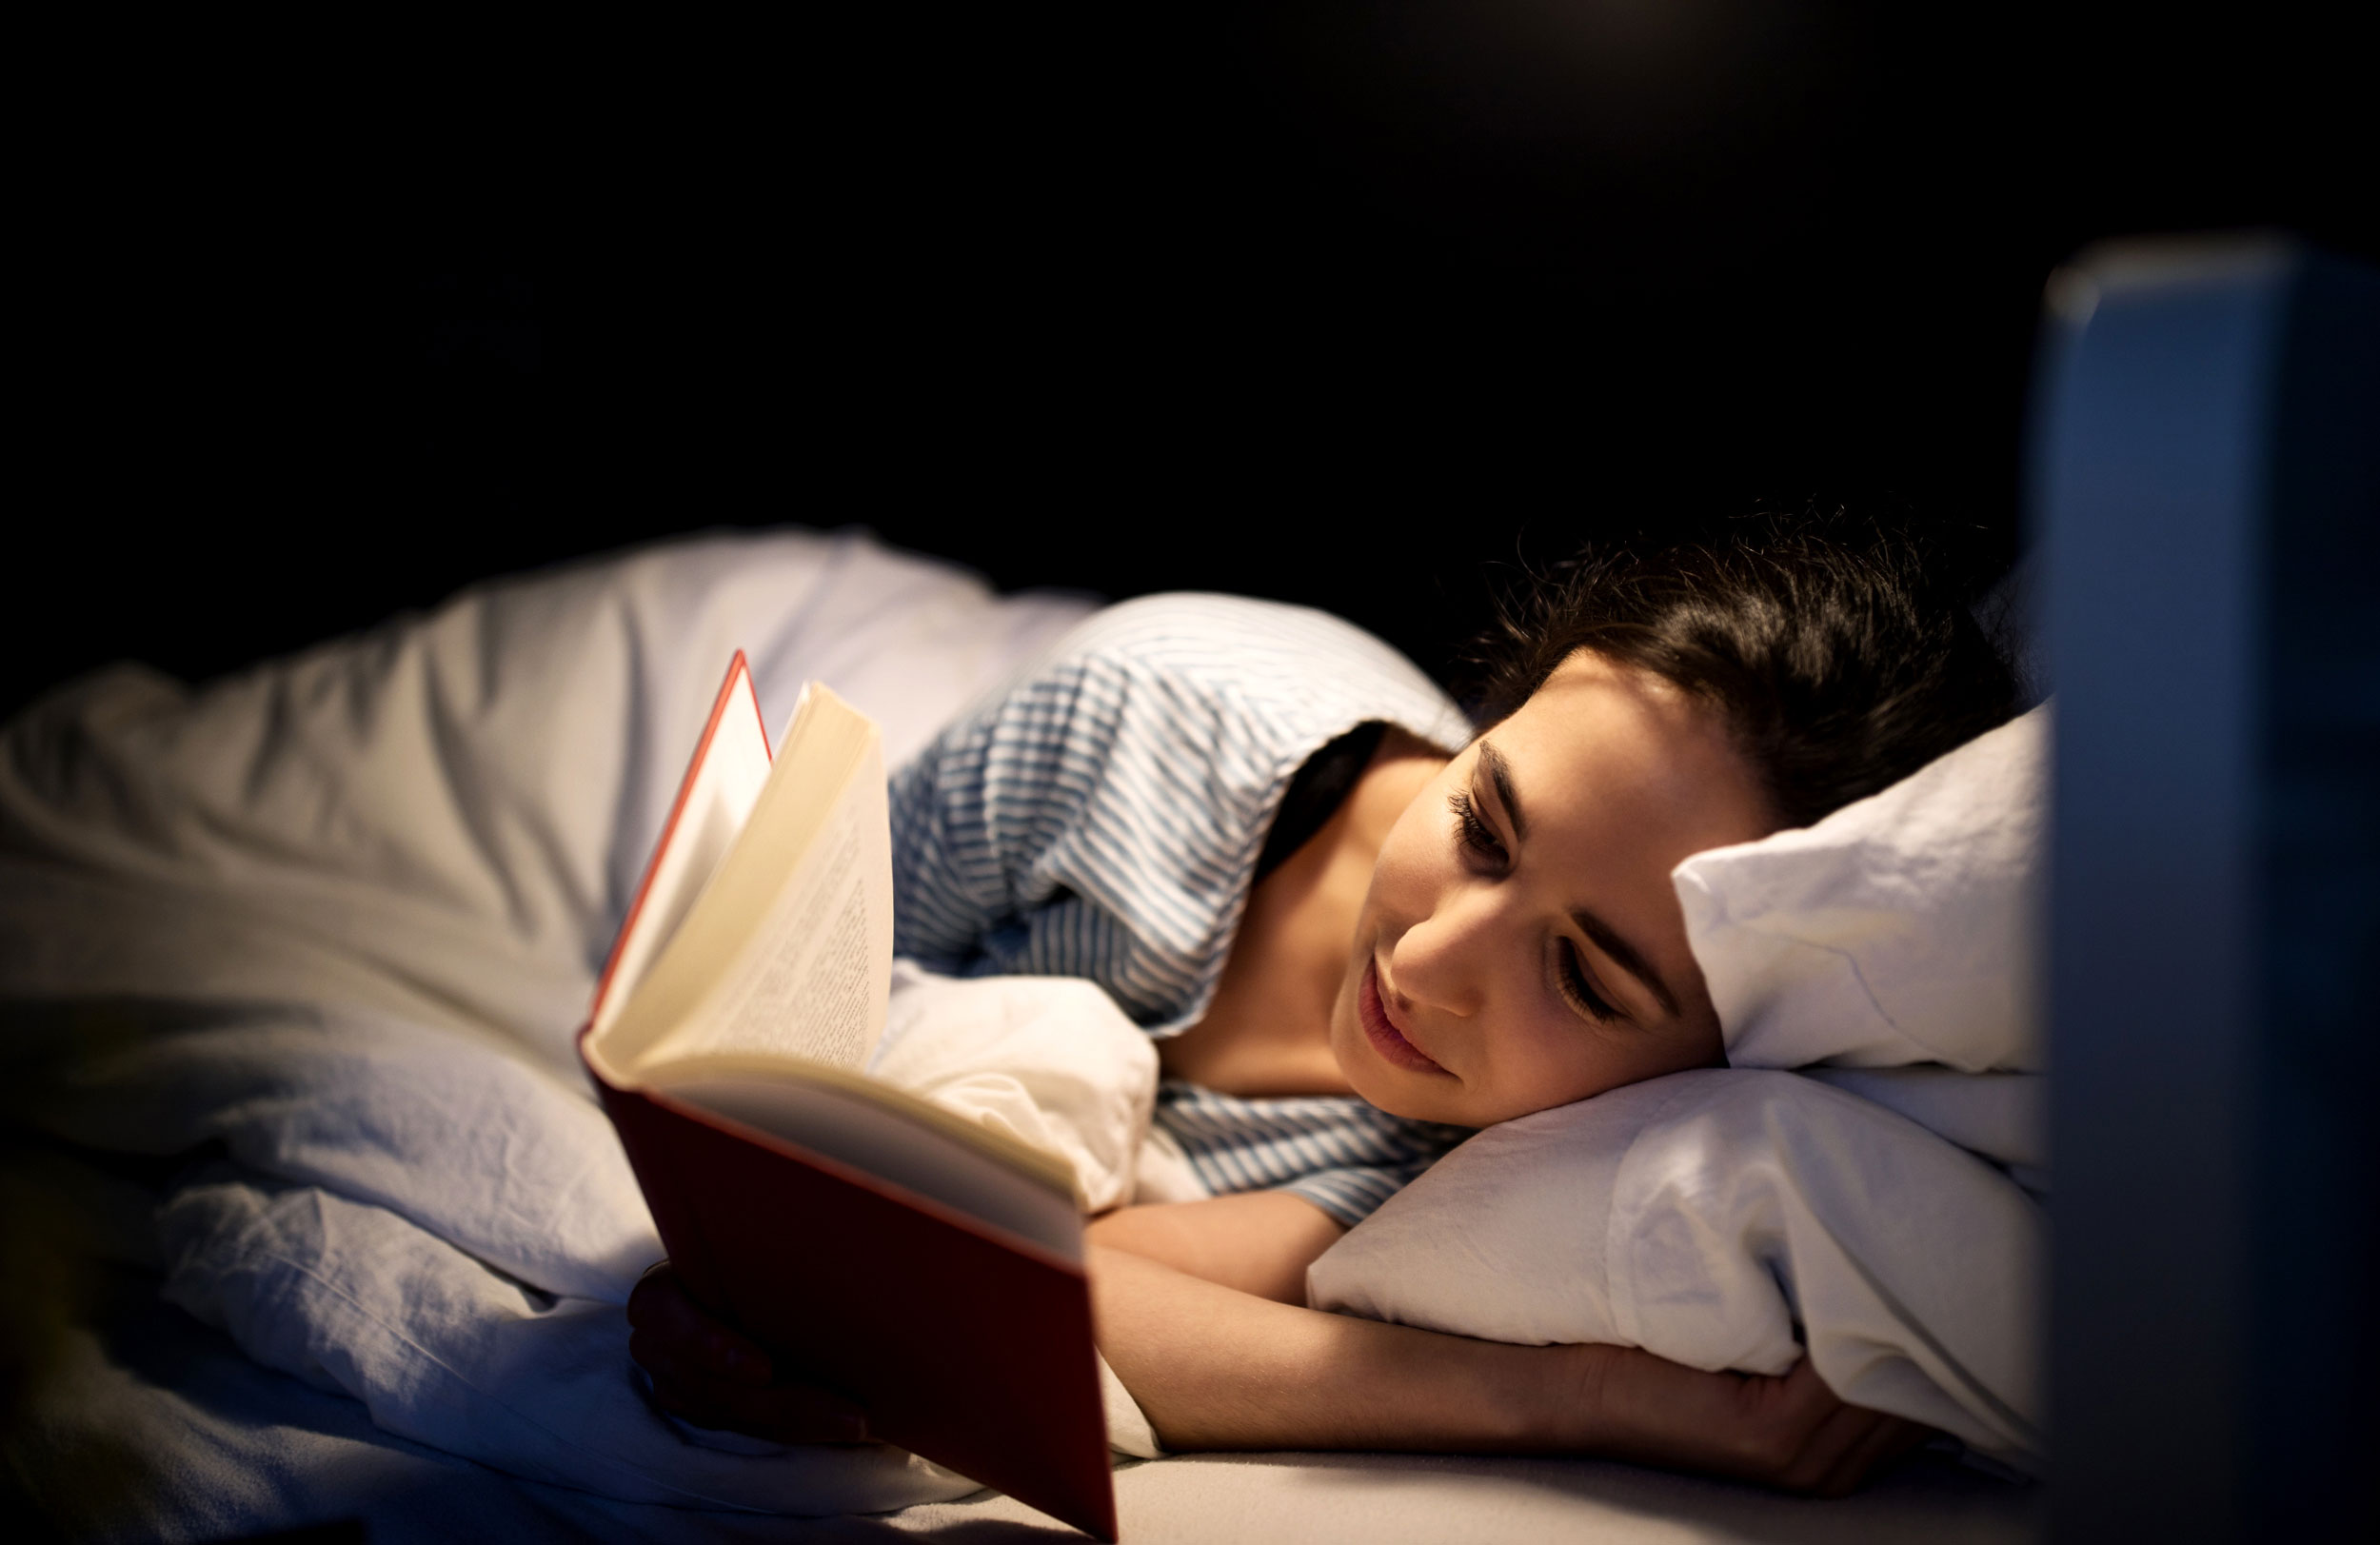 The relationship between reading books and healthy sleep in people